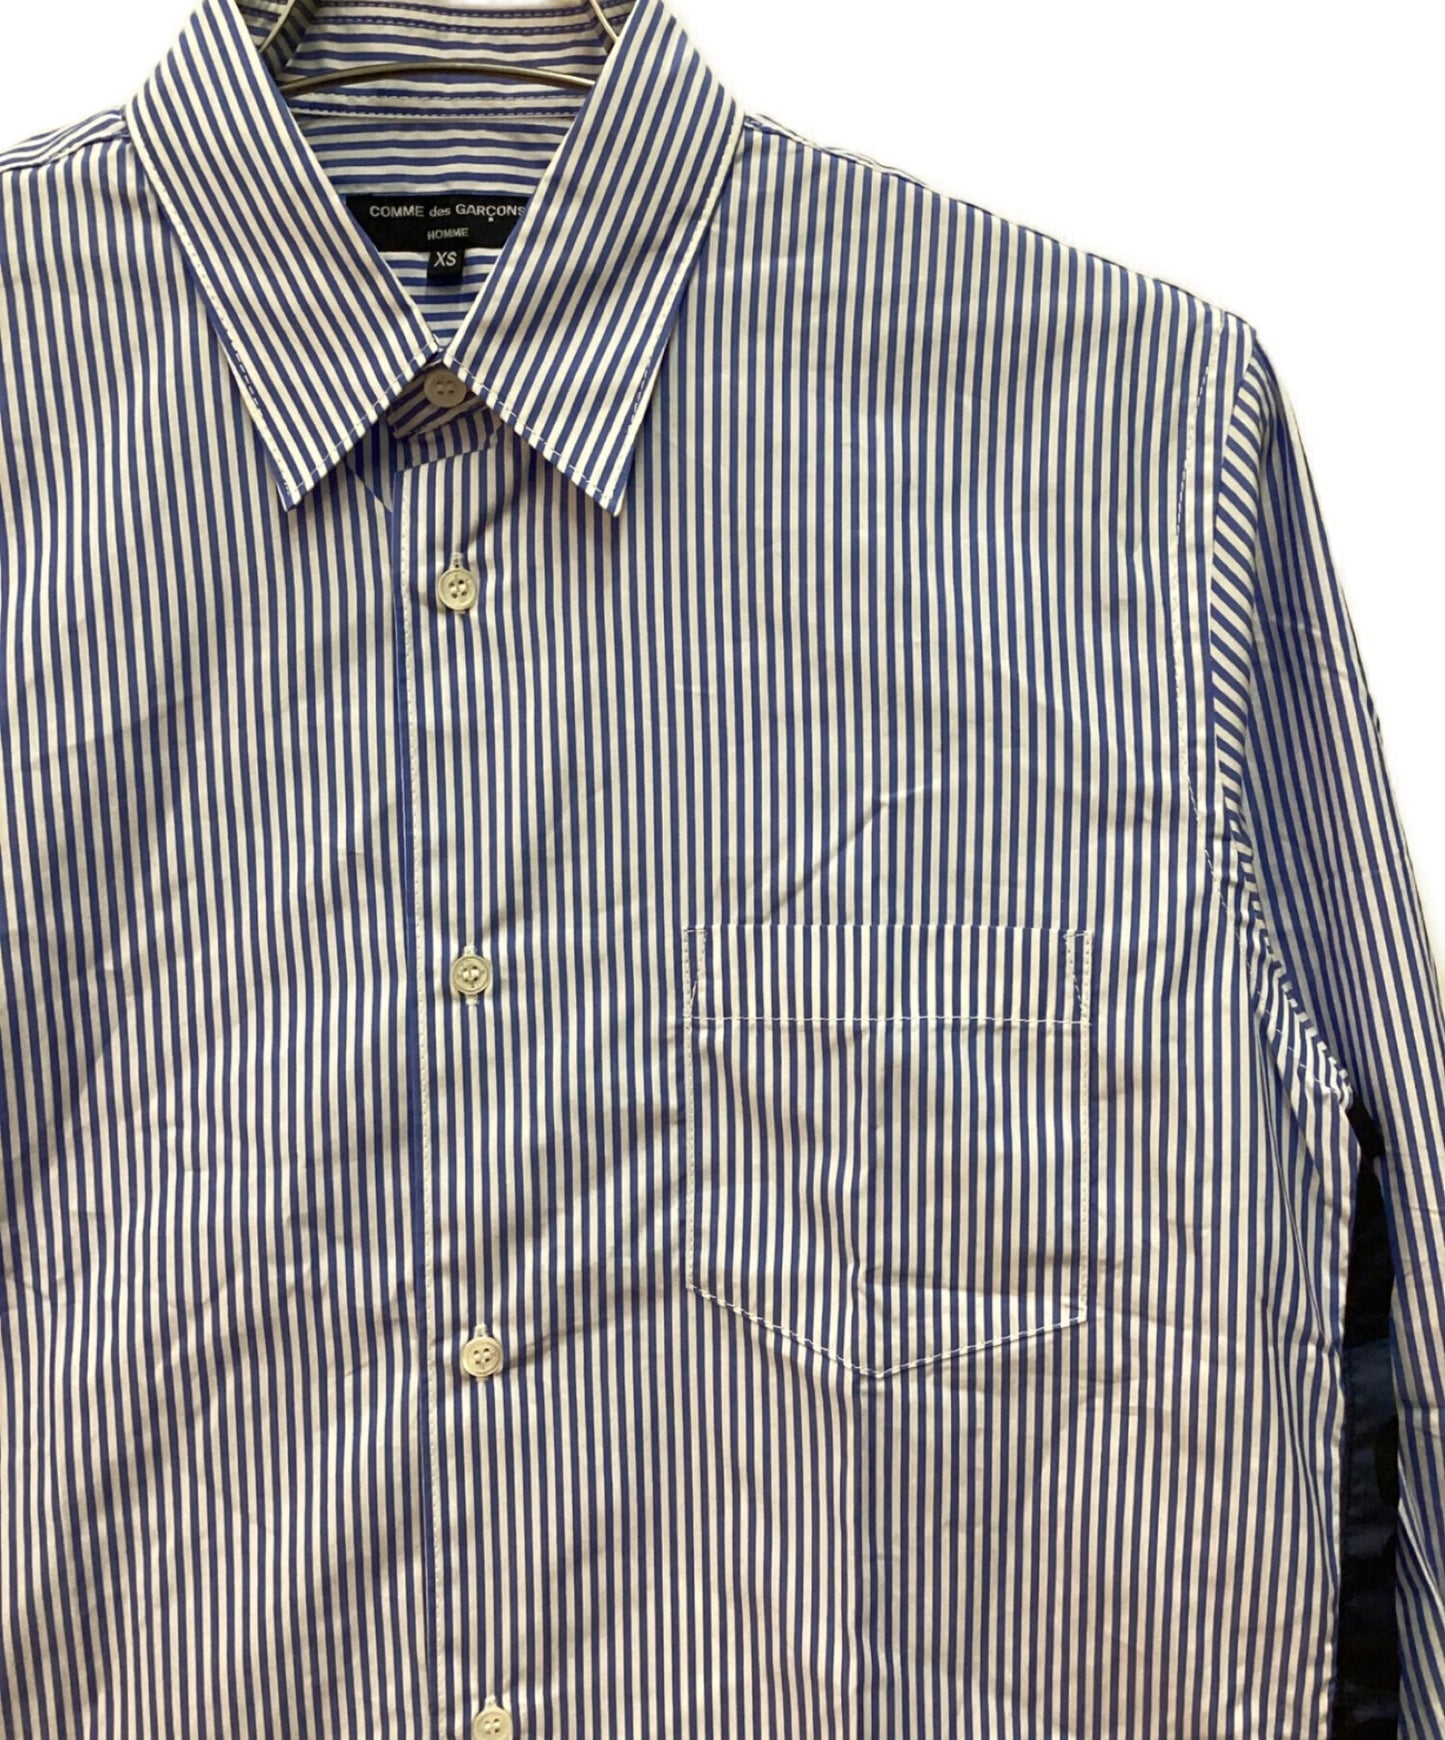 Comme des Garcons Homme Camouflage Switched Stripe襯衫長袖襯衫HE-B024